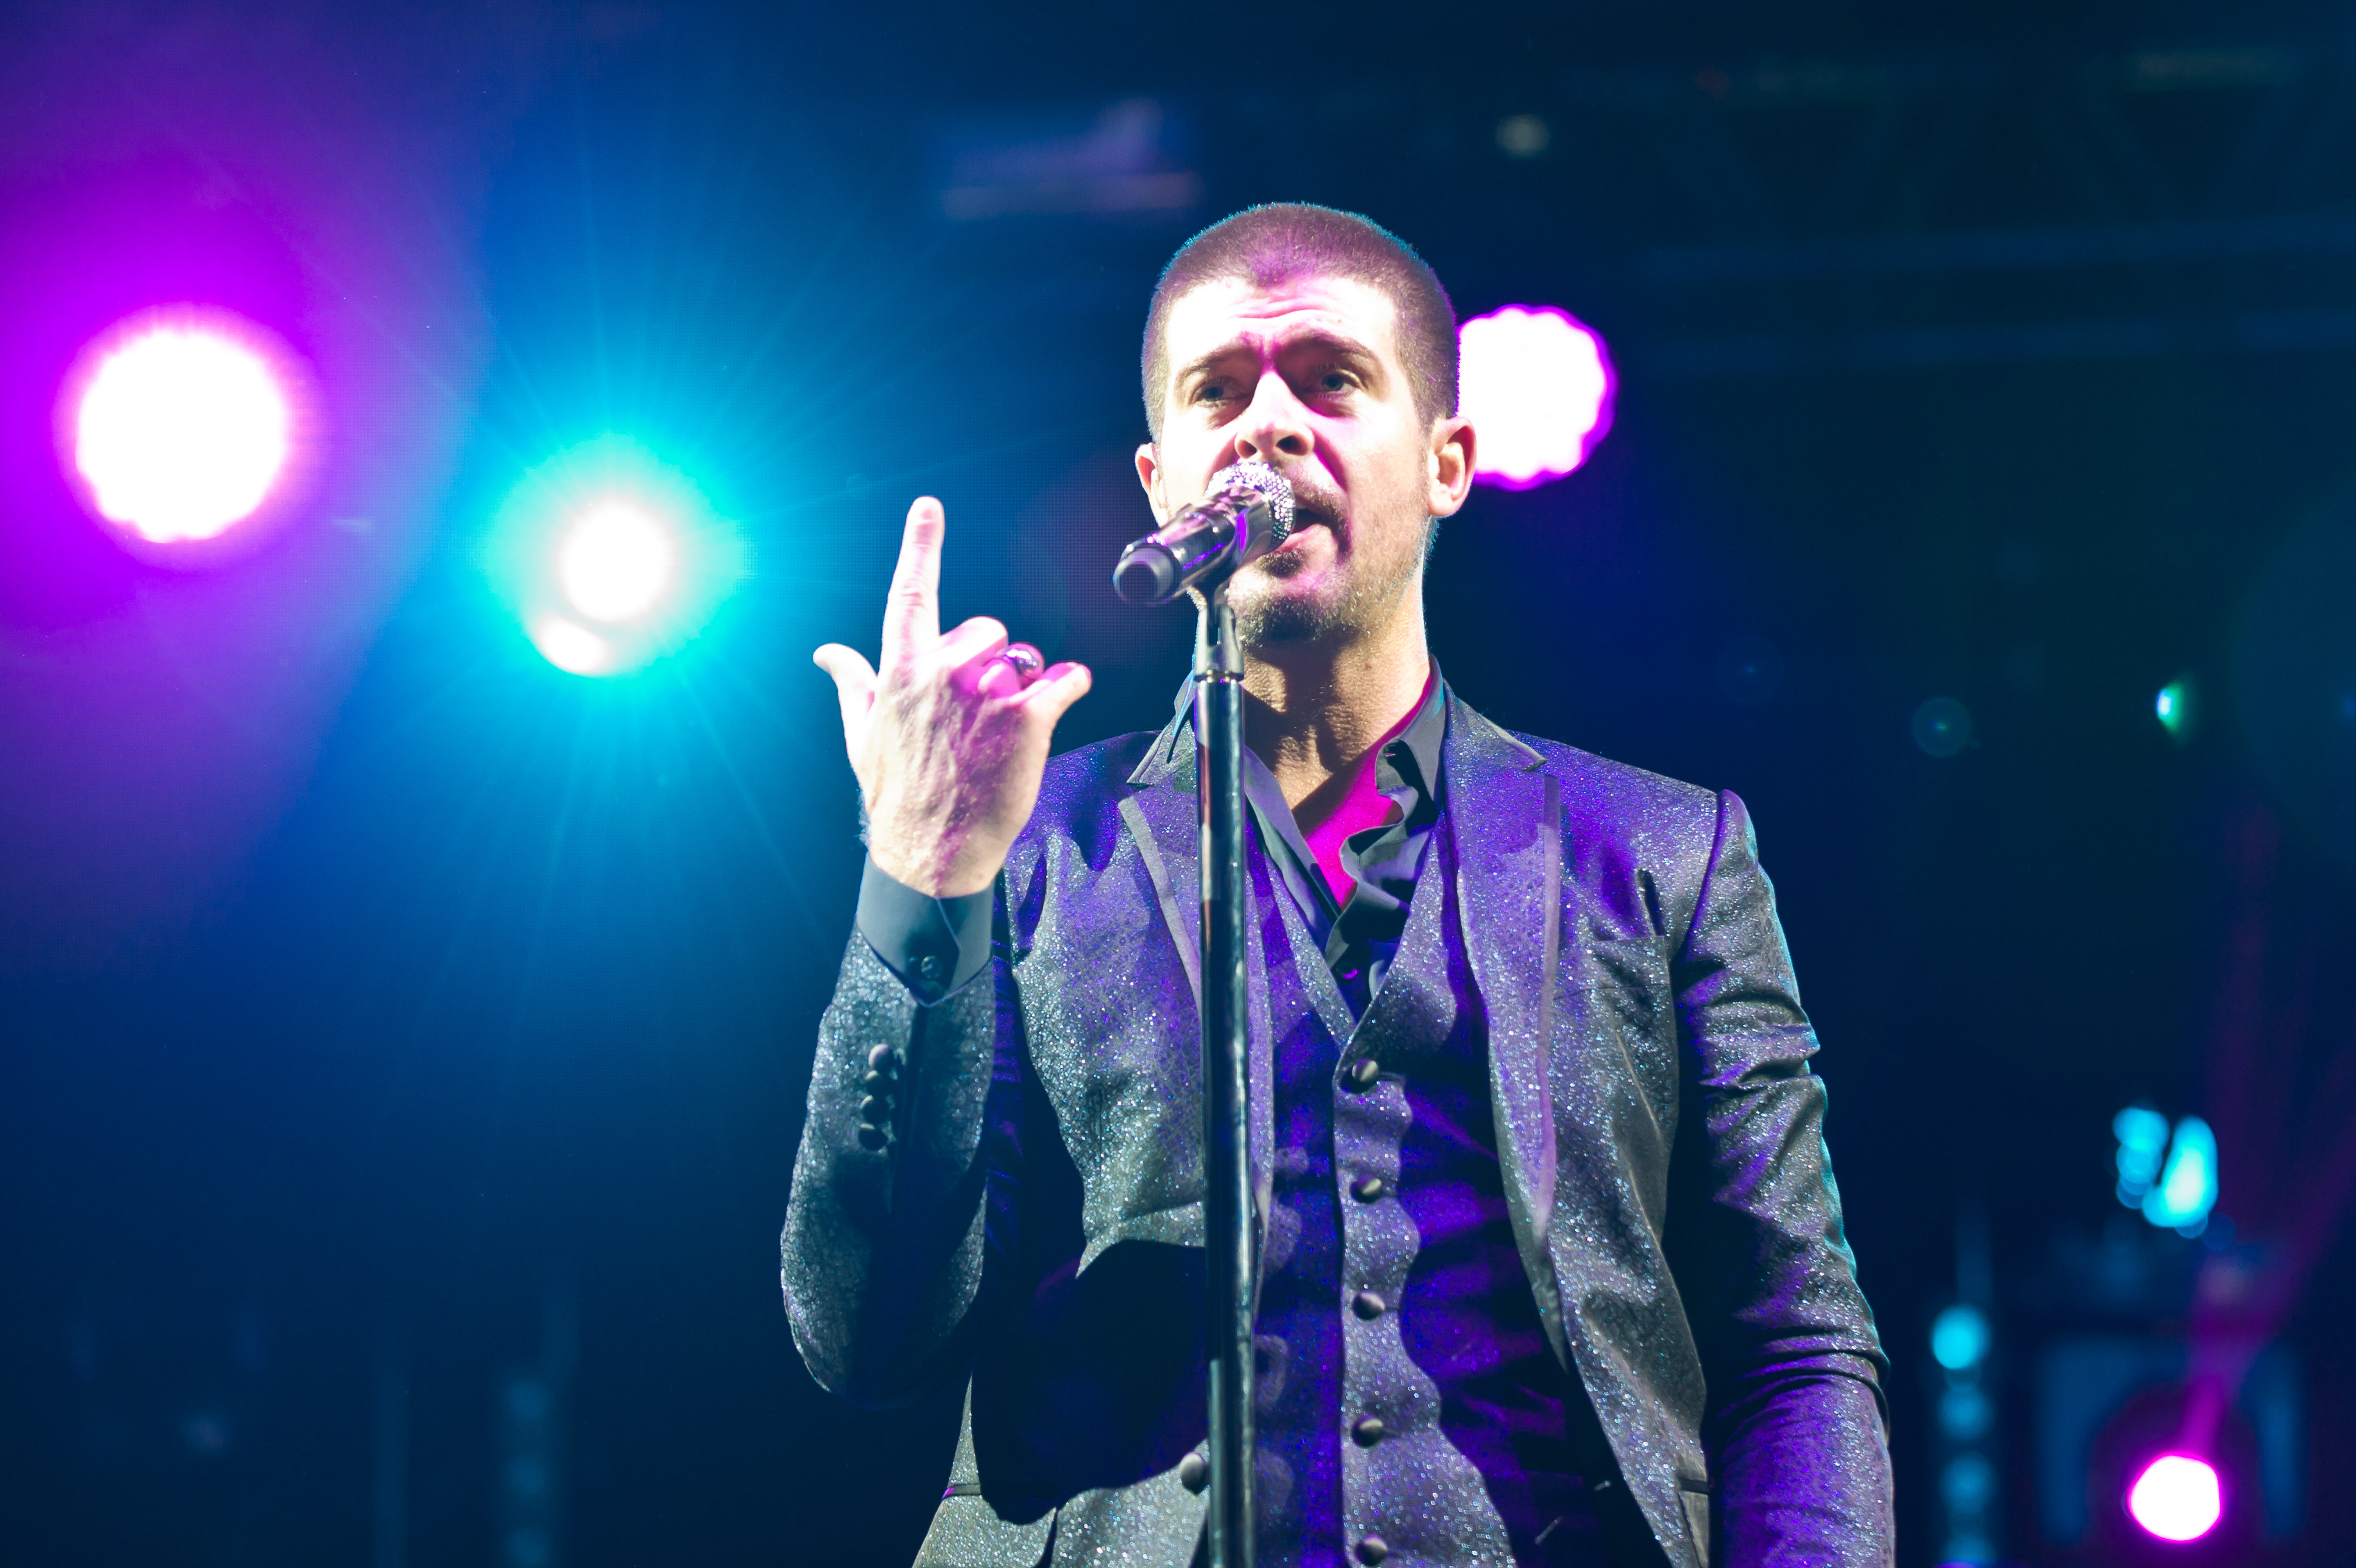 Robin Thicke performs on stage at Wireless Festival at Finsbury Park on July 6, 2014 in London.